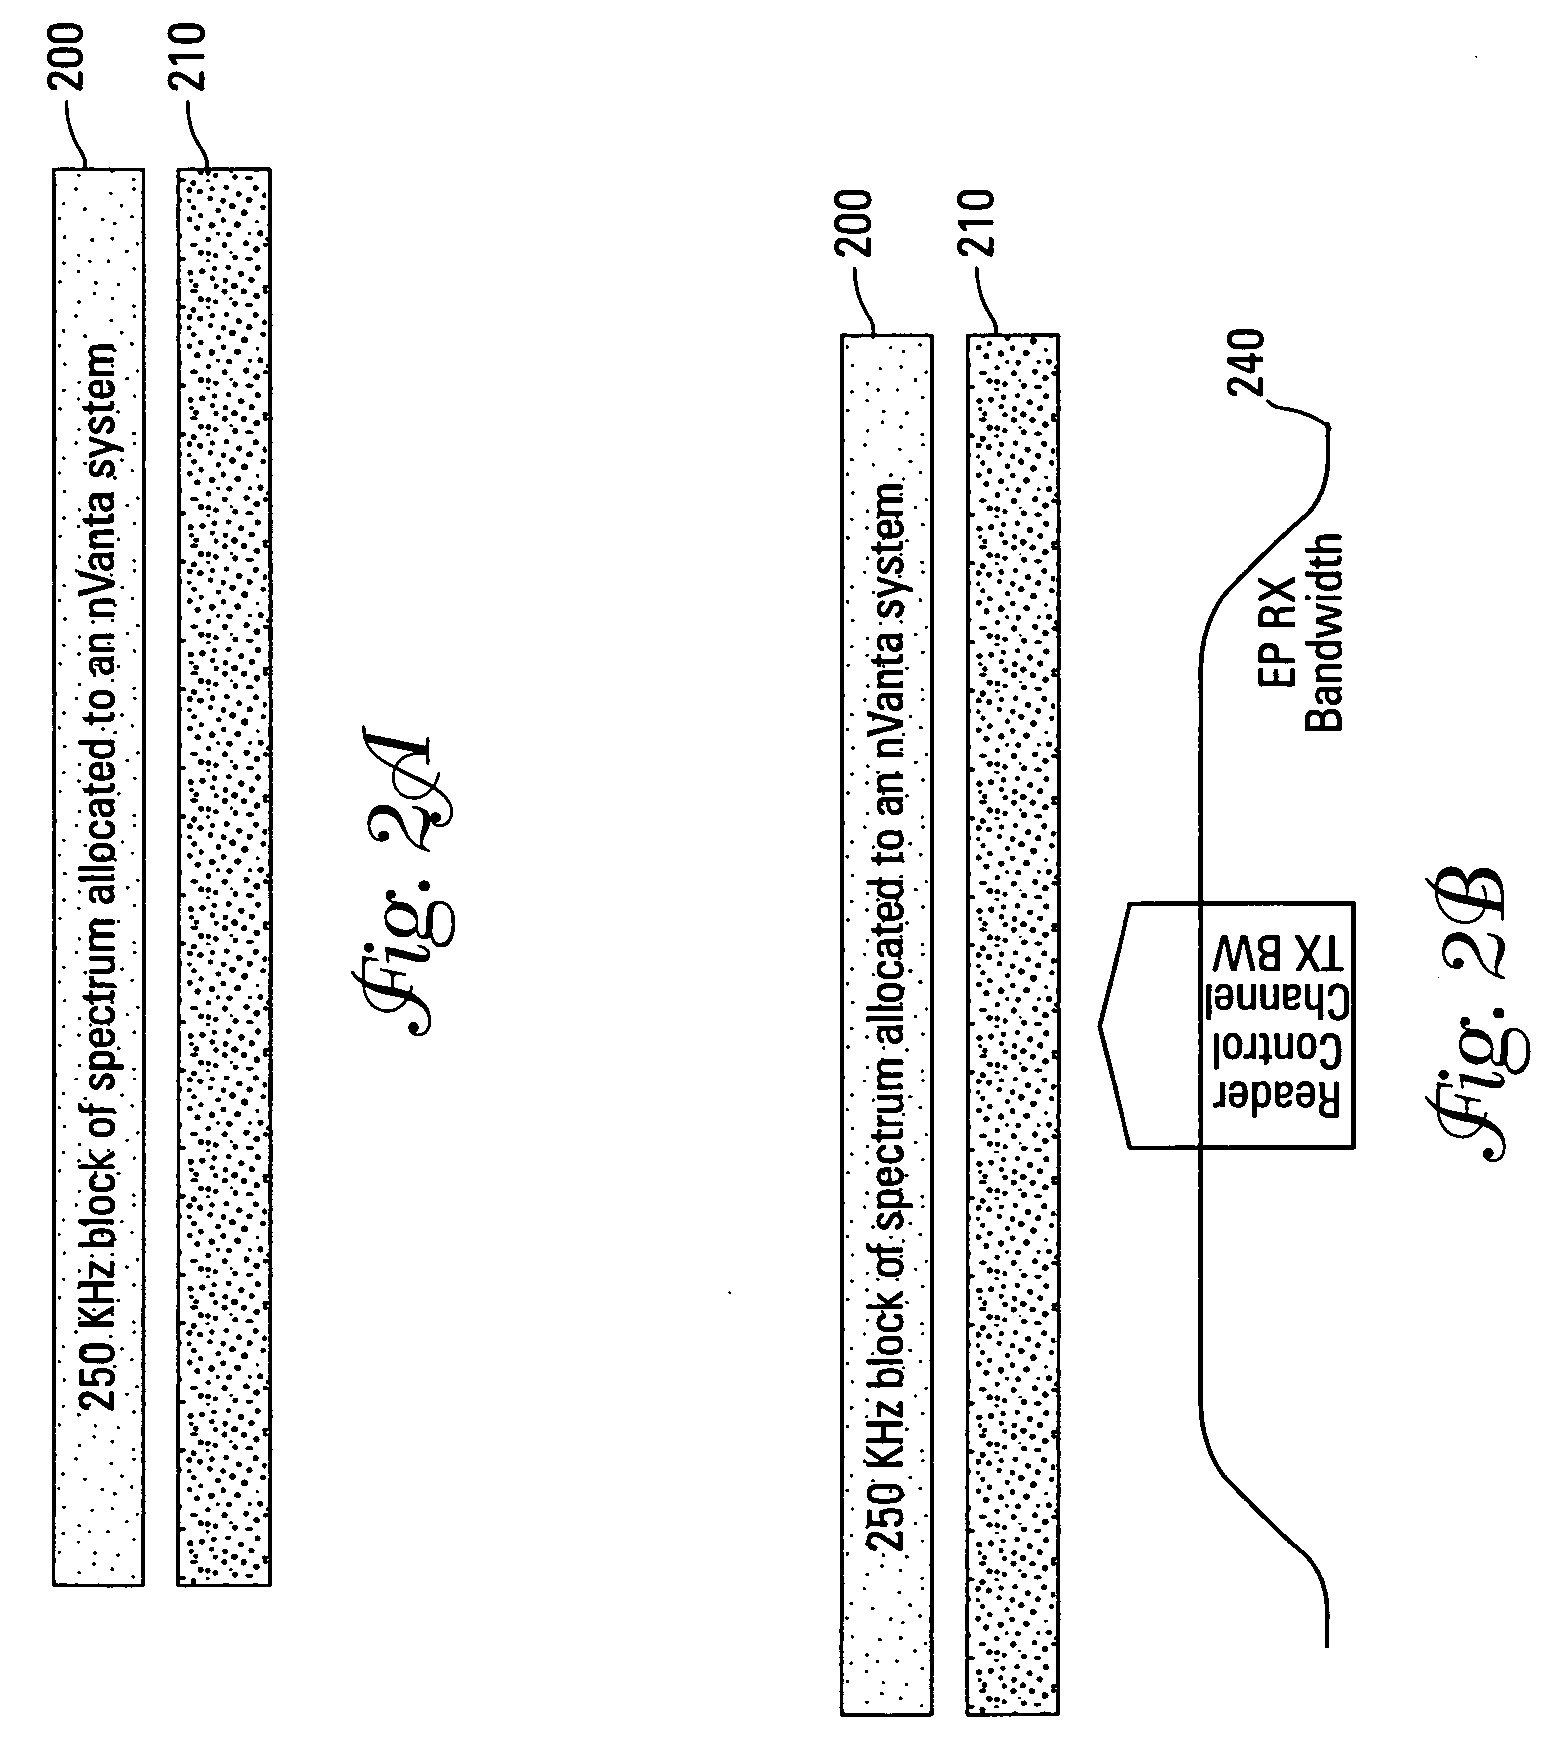 System and method for optimizing contiguous channel operation with cellular reuse